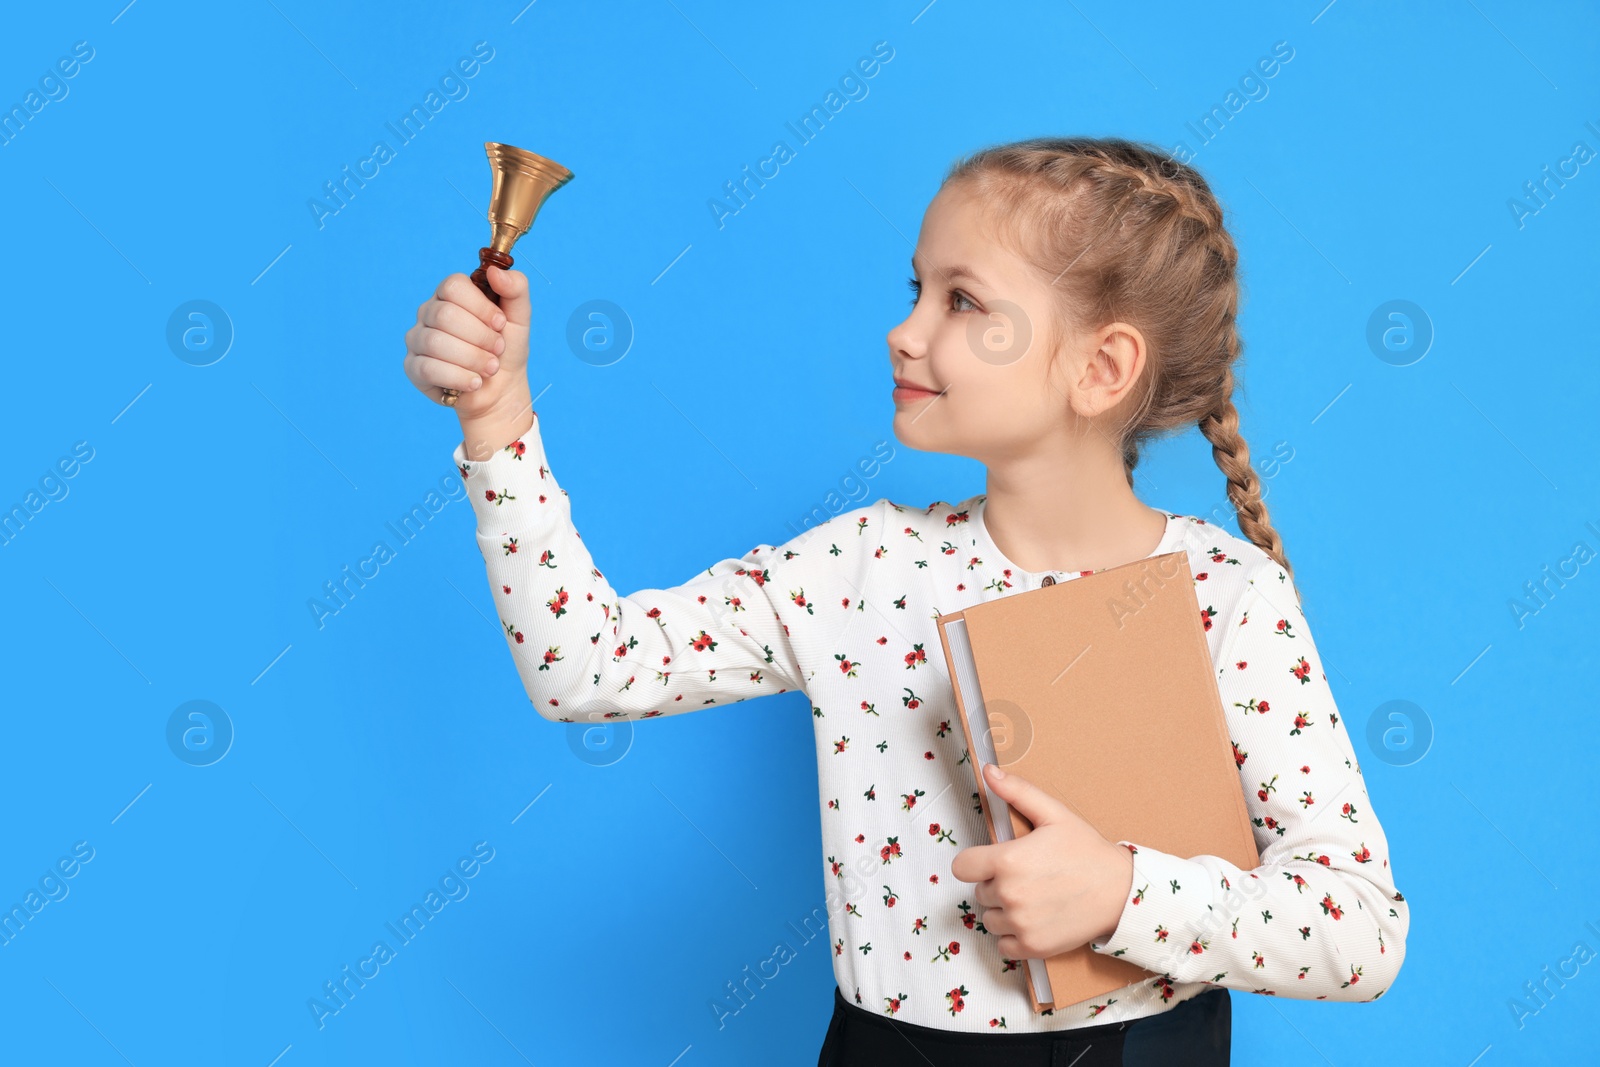 Photo of Pupil with school bell and book on light blue background